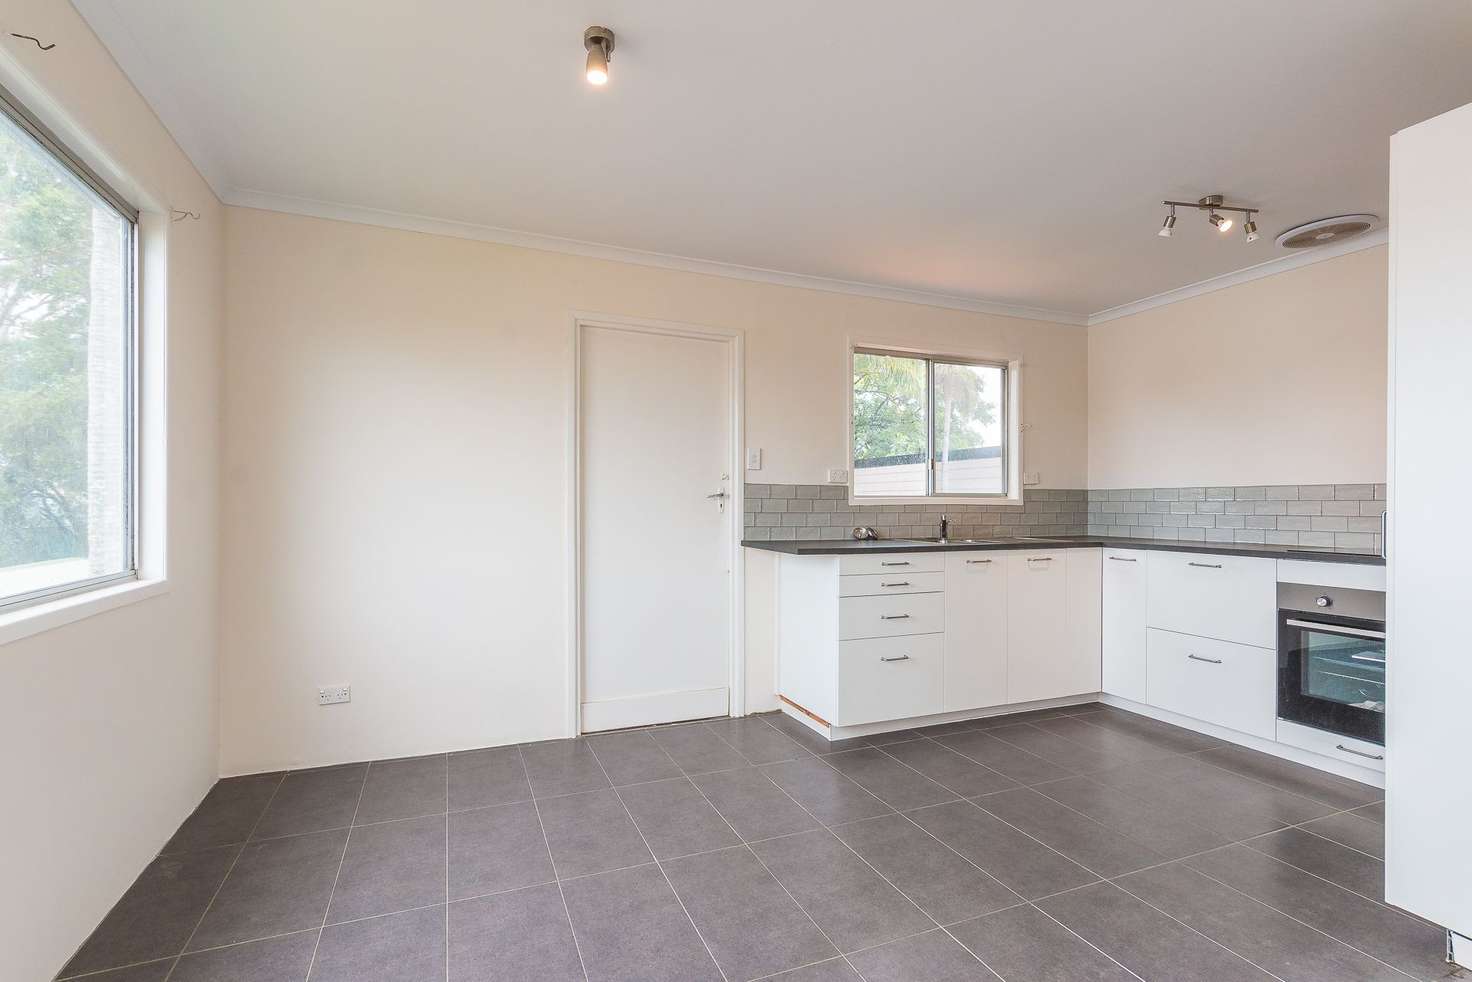 Main view of Homely house listing, 28 Mcpherson Street, Kippa-ring QLD 4021